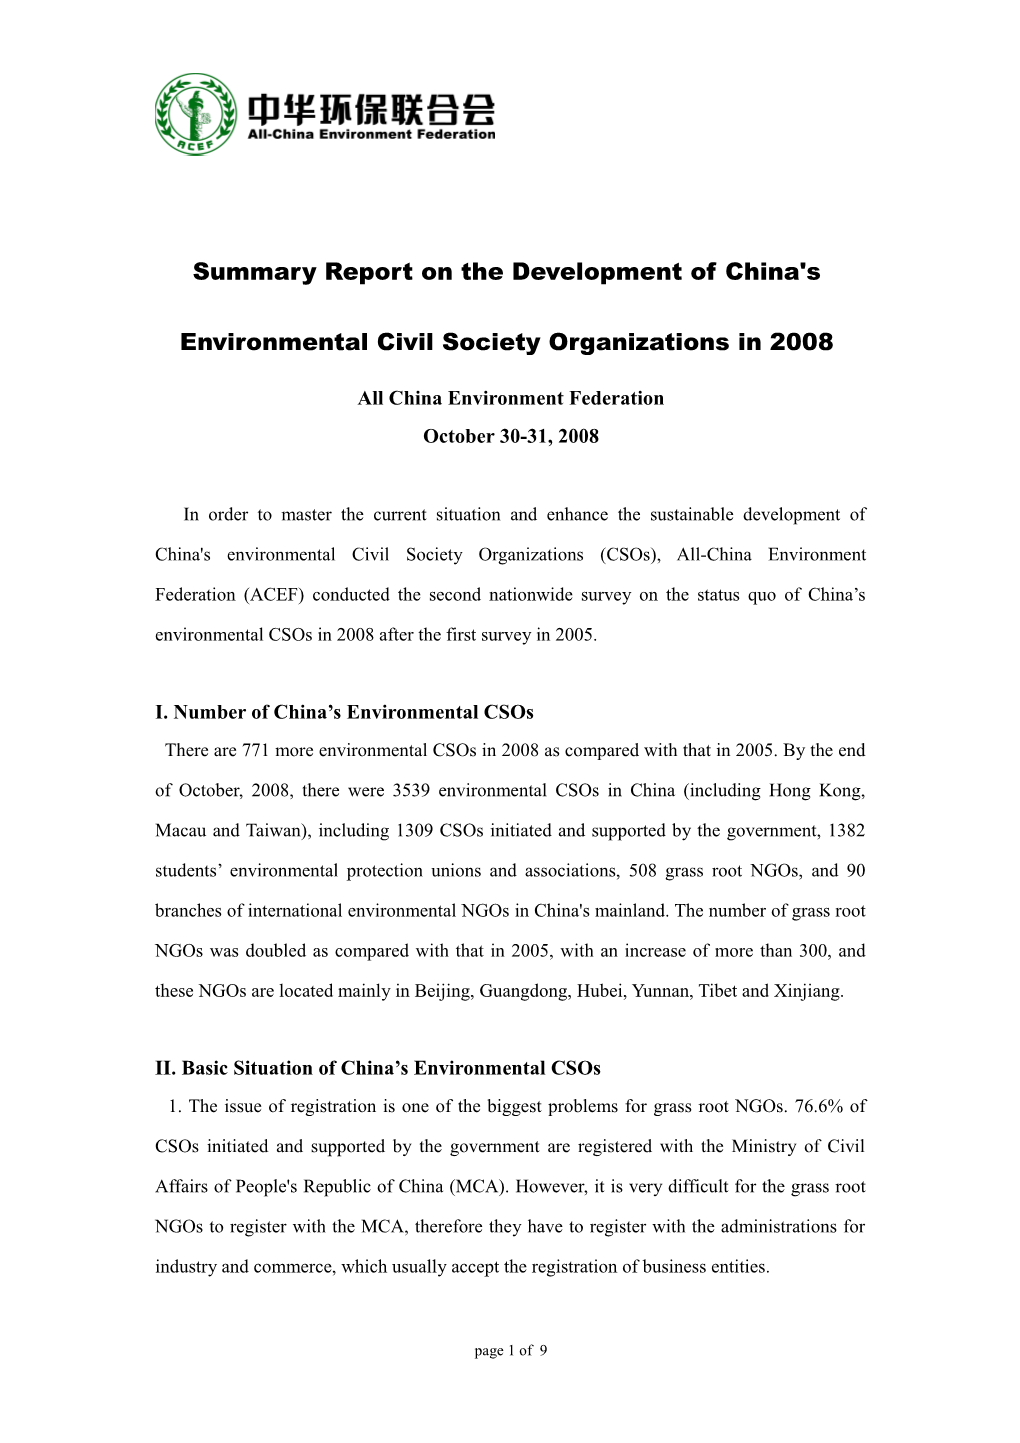 Briefing on the Development of China's